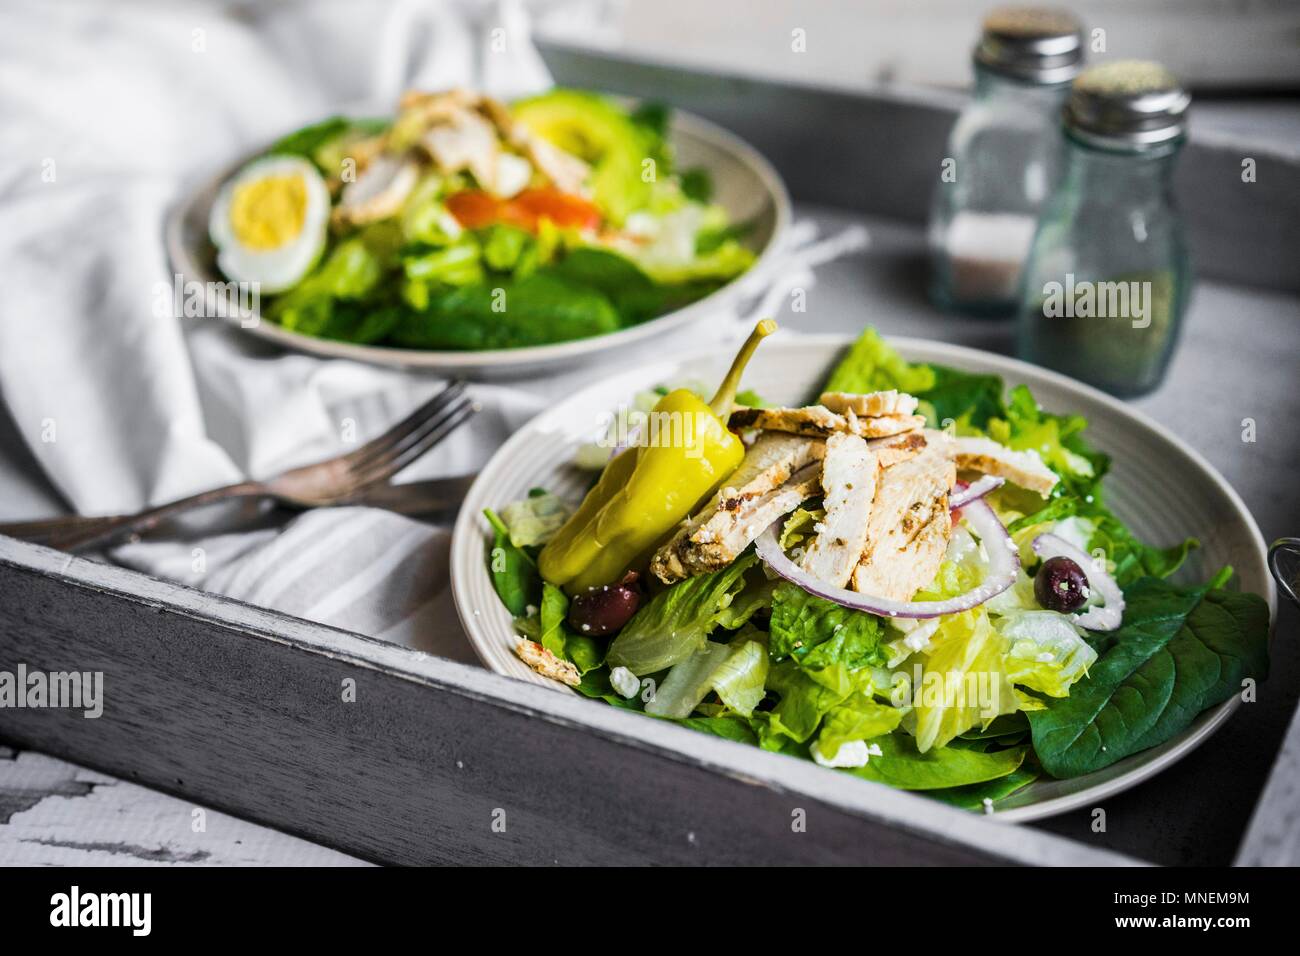 Green salad with chicken, chillis, red onions and olives Stock Photo